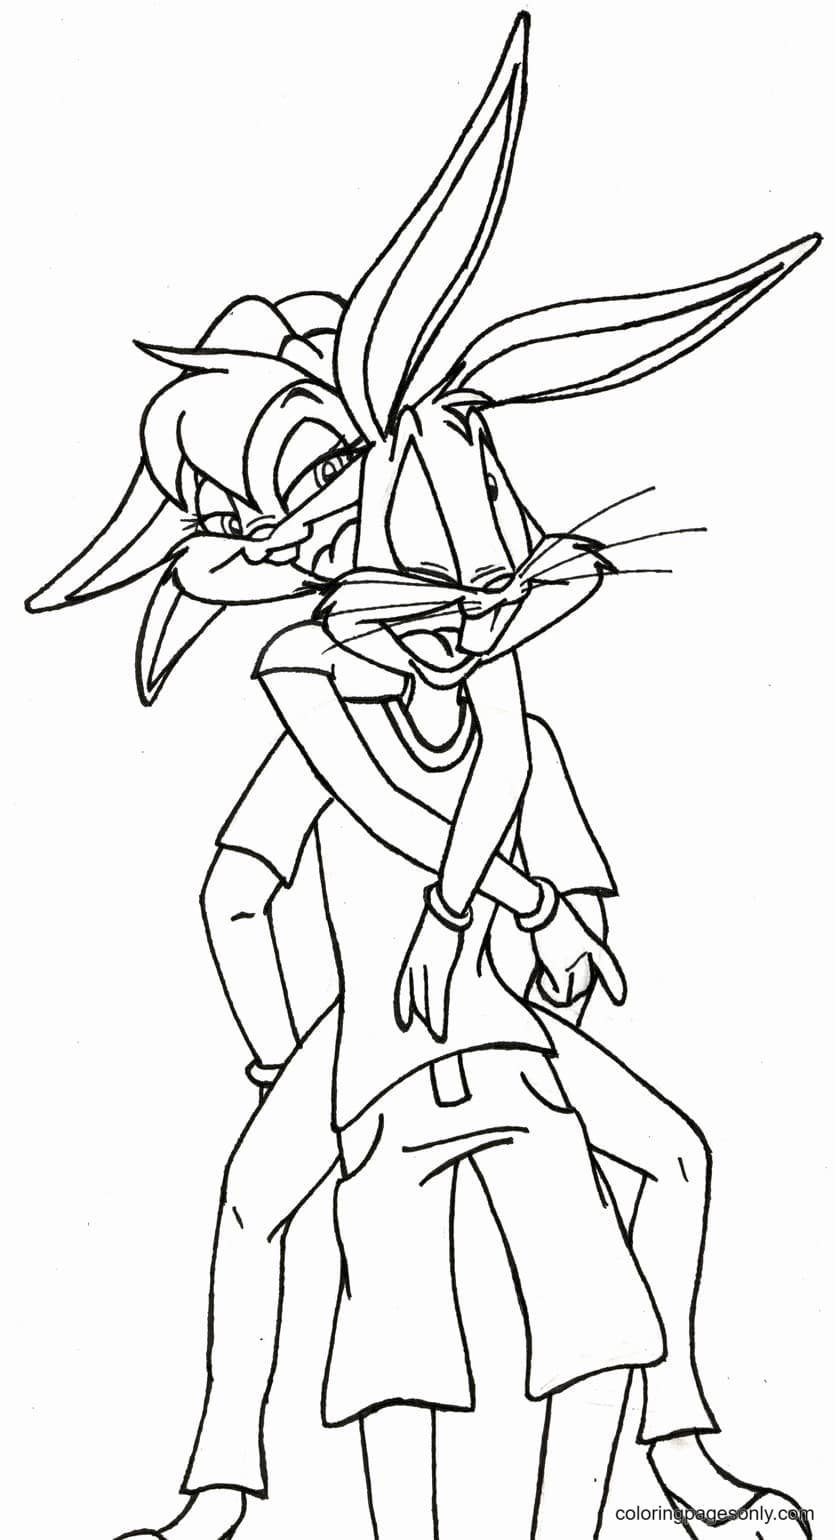 Bugs Bunny Carrying Lola Bunny on his back from Lola Bunny